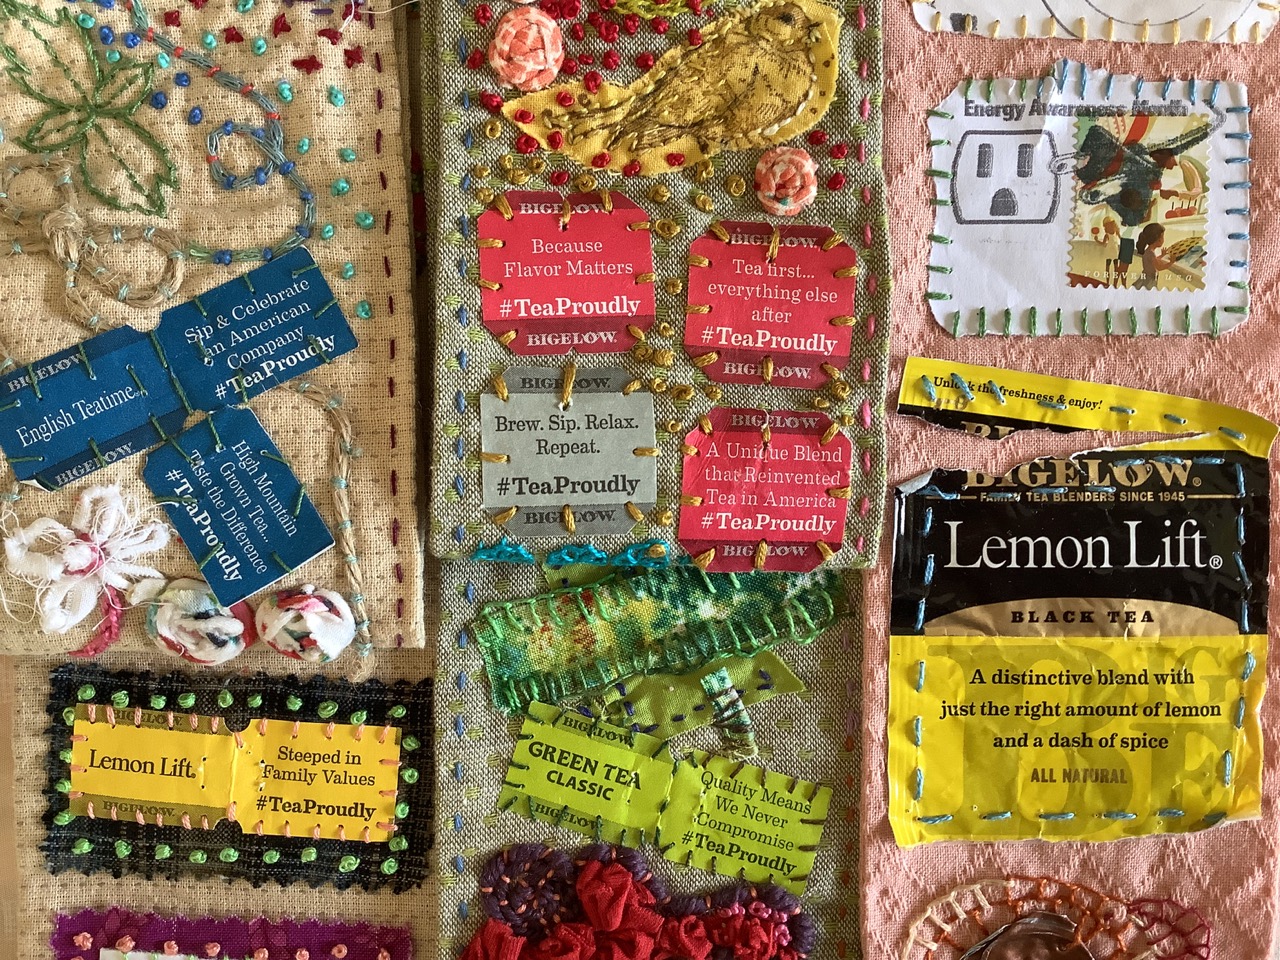 Fiber Antics by Veronica: 100 Days of Slow Stitching with found objects—a  recap